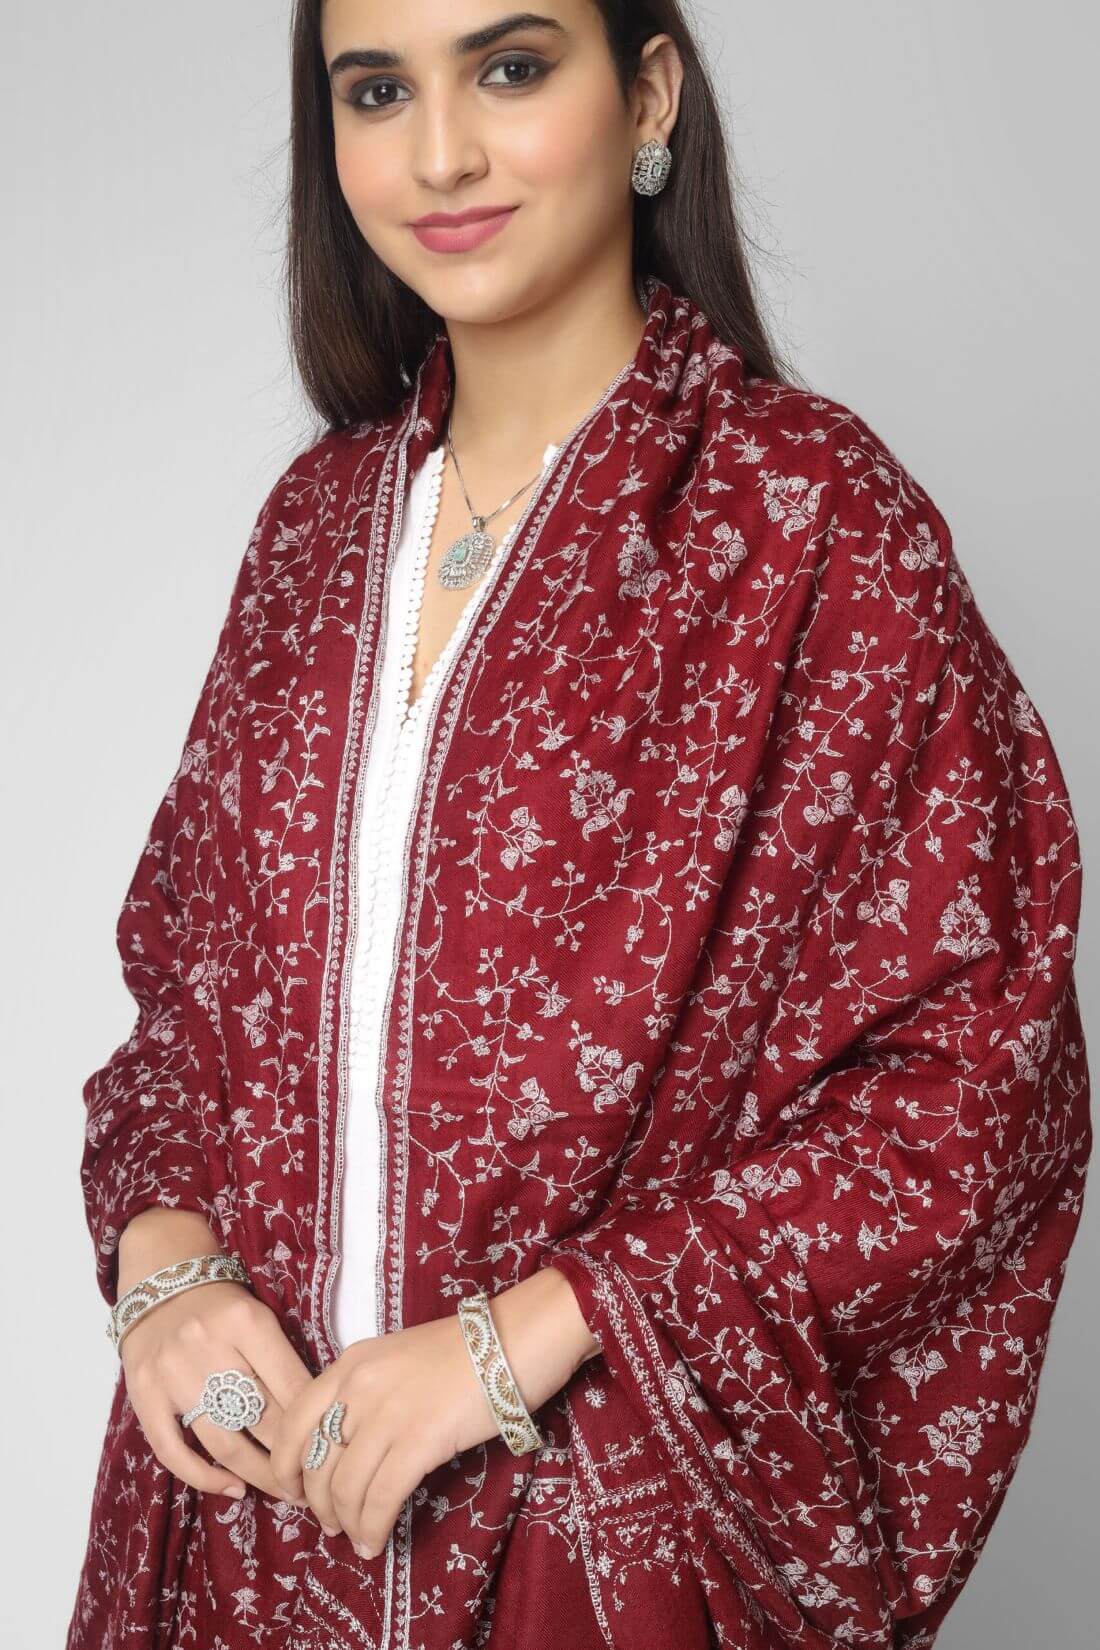 PASHMINA SHAWL - The embroidery is typically done by hand, using a needle and thread in shades of fade gray, which creates a beautiful and subtle contrast against the deep maroon color. The result is a stunning and sophisticated shawl that can be worn on special occasions or as a statement piece with any outfit.